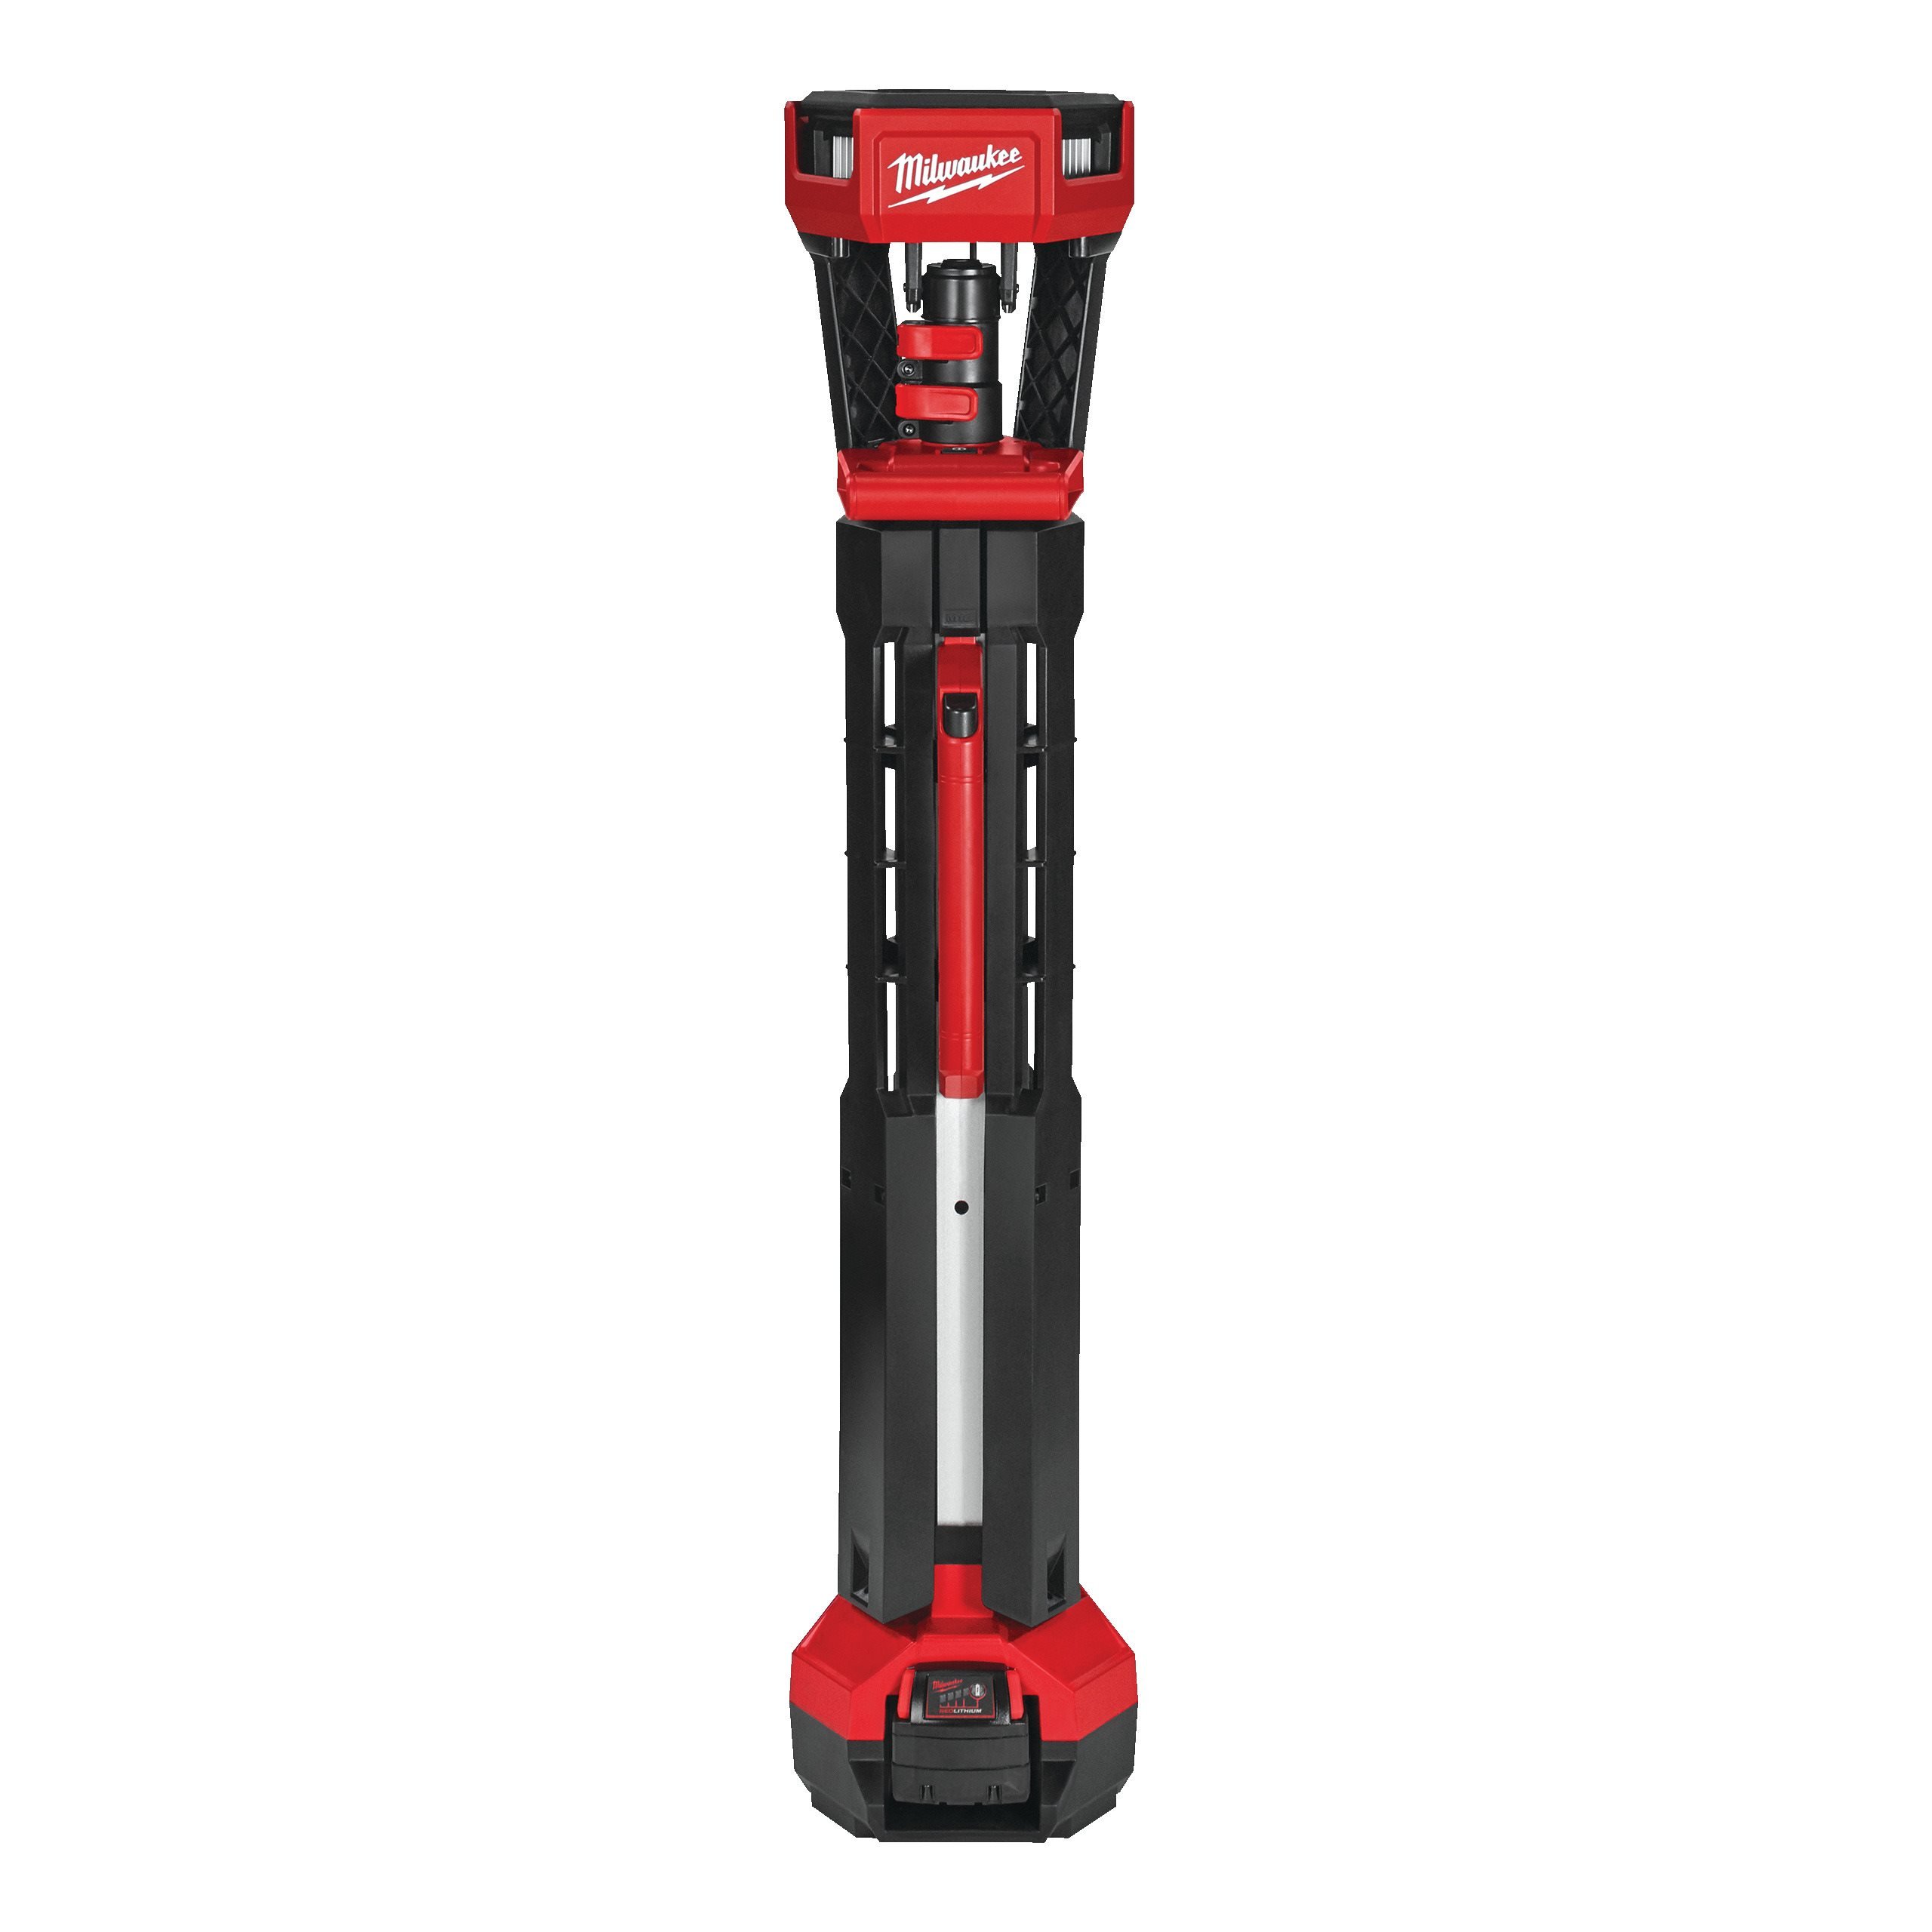 New Naked-no Batteries or Charger Milwaukee M18SAL-0 M18 LED Site Light